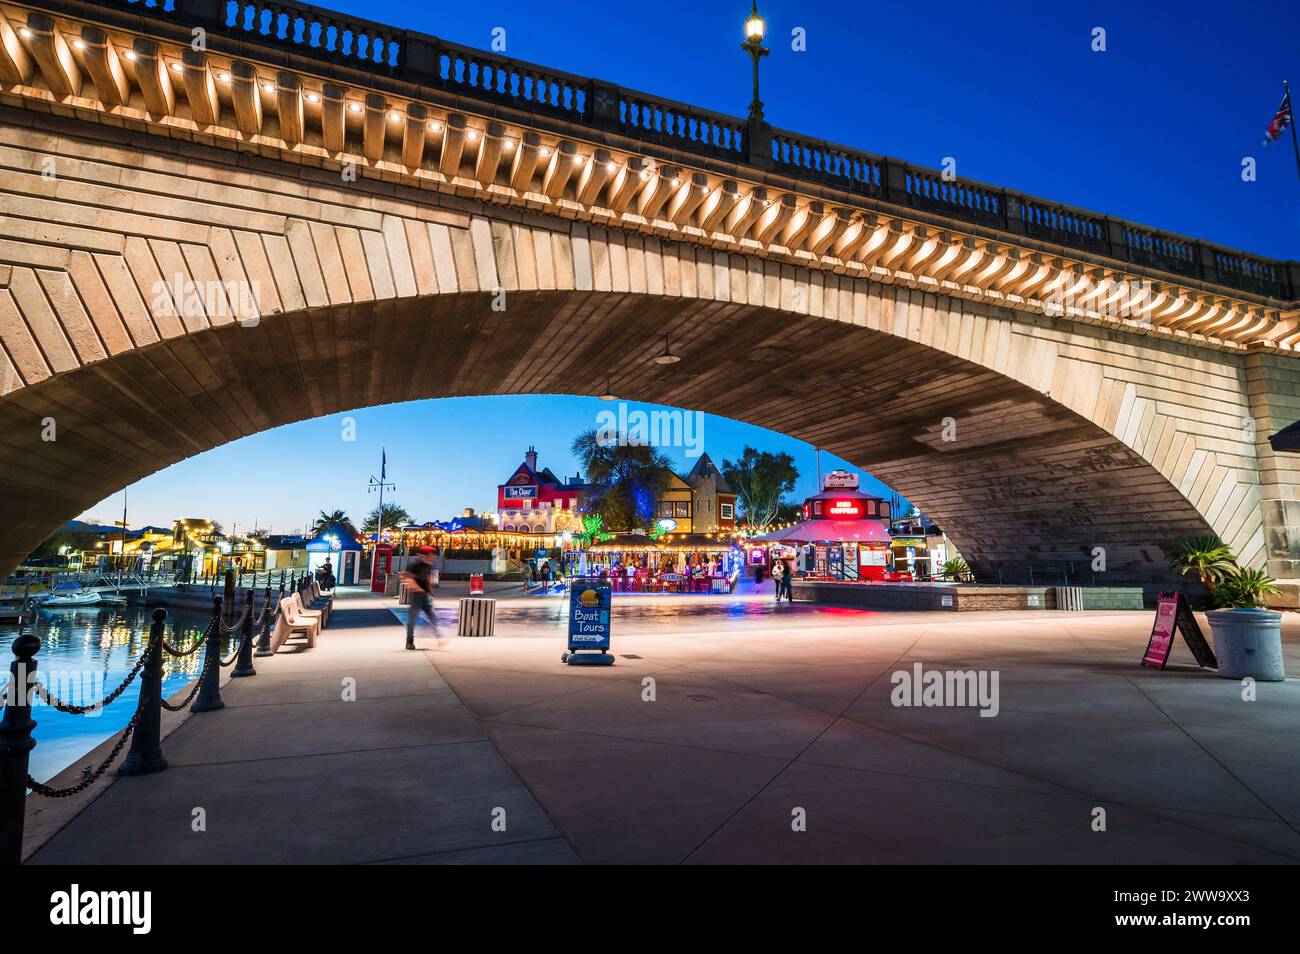 Tourists near the old London Bridge at sunset, which was relocated from London England in the 1970’s to Lake Havasu Arizona. Stock Photo